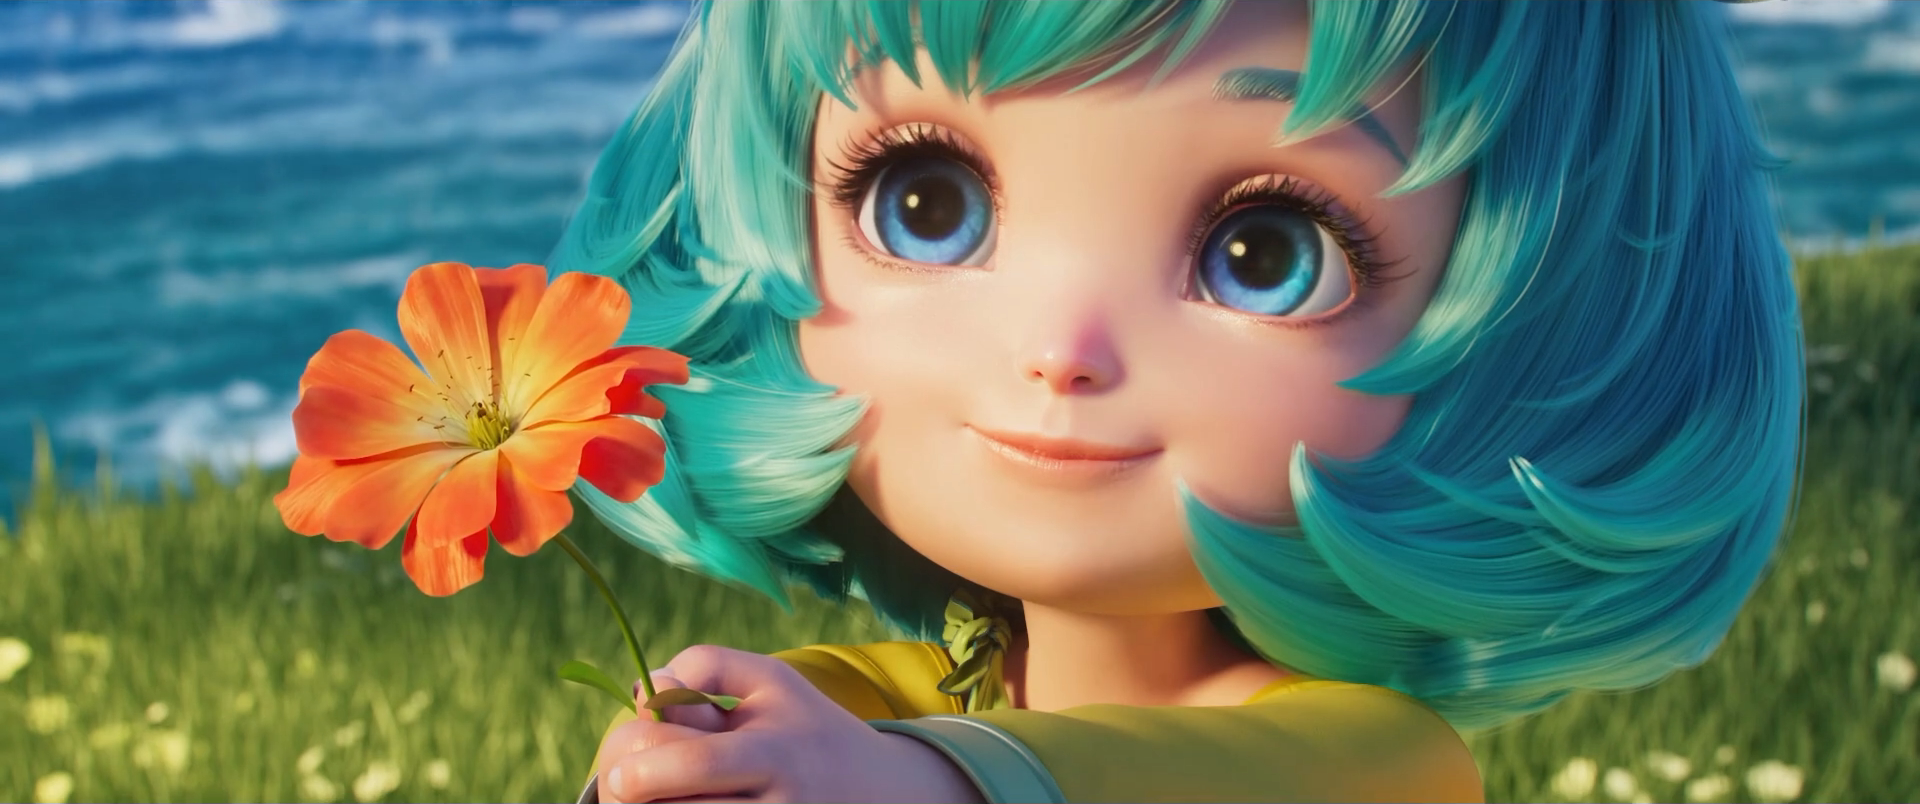 General 1920x804 Arena of Valor animation flowers plants blue eyes cyan hair children